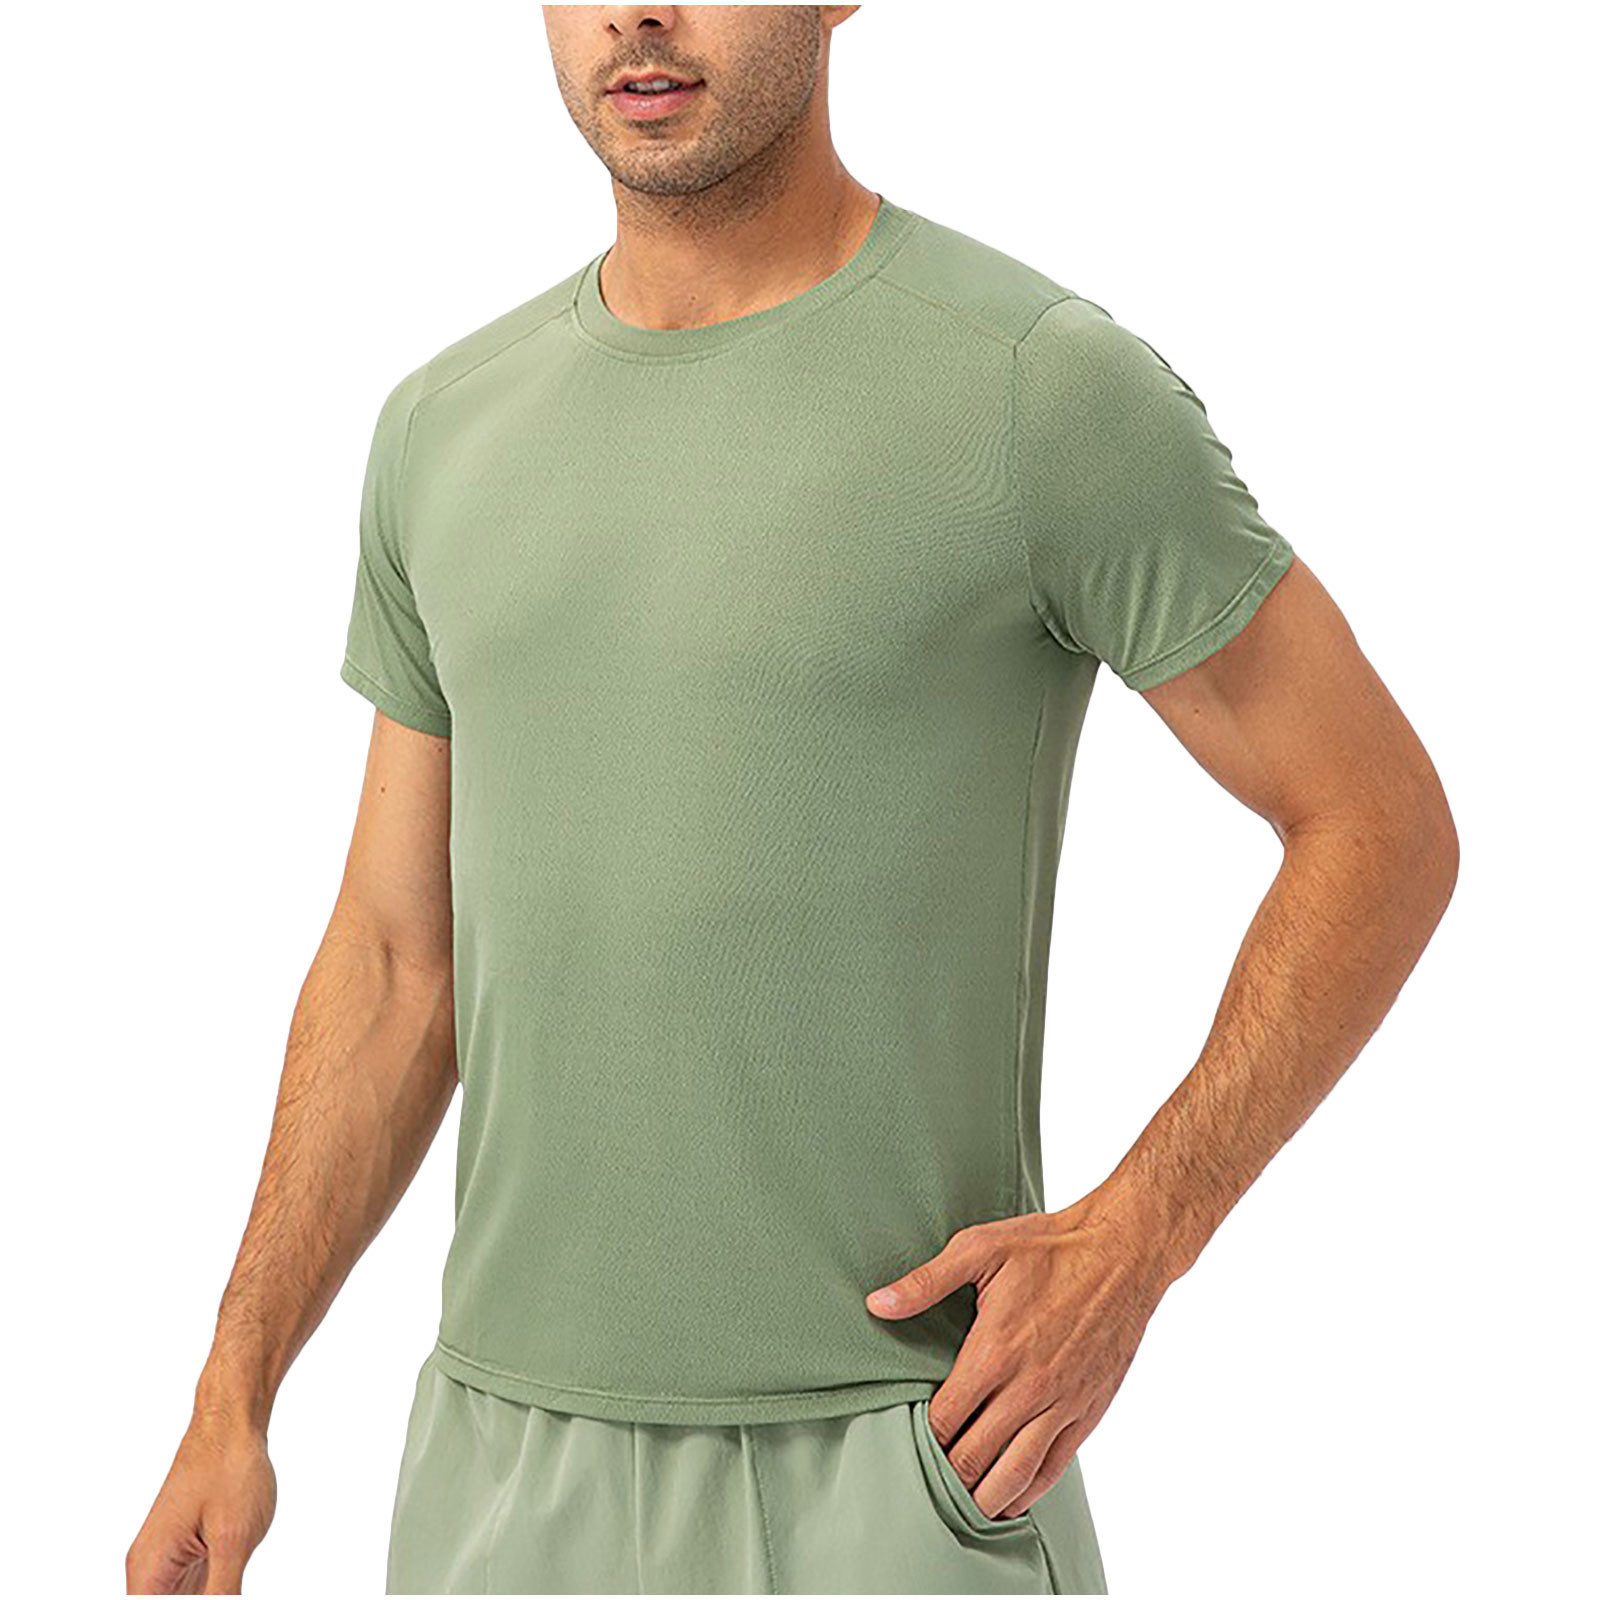 CYMMPU Men's Round Neck Dry Fit Moisture Wicking Sports Tees